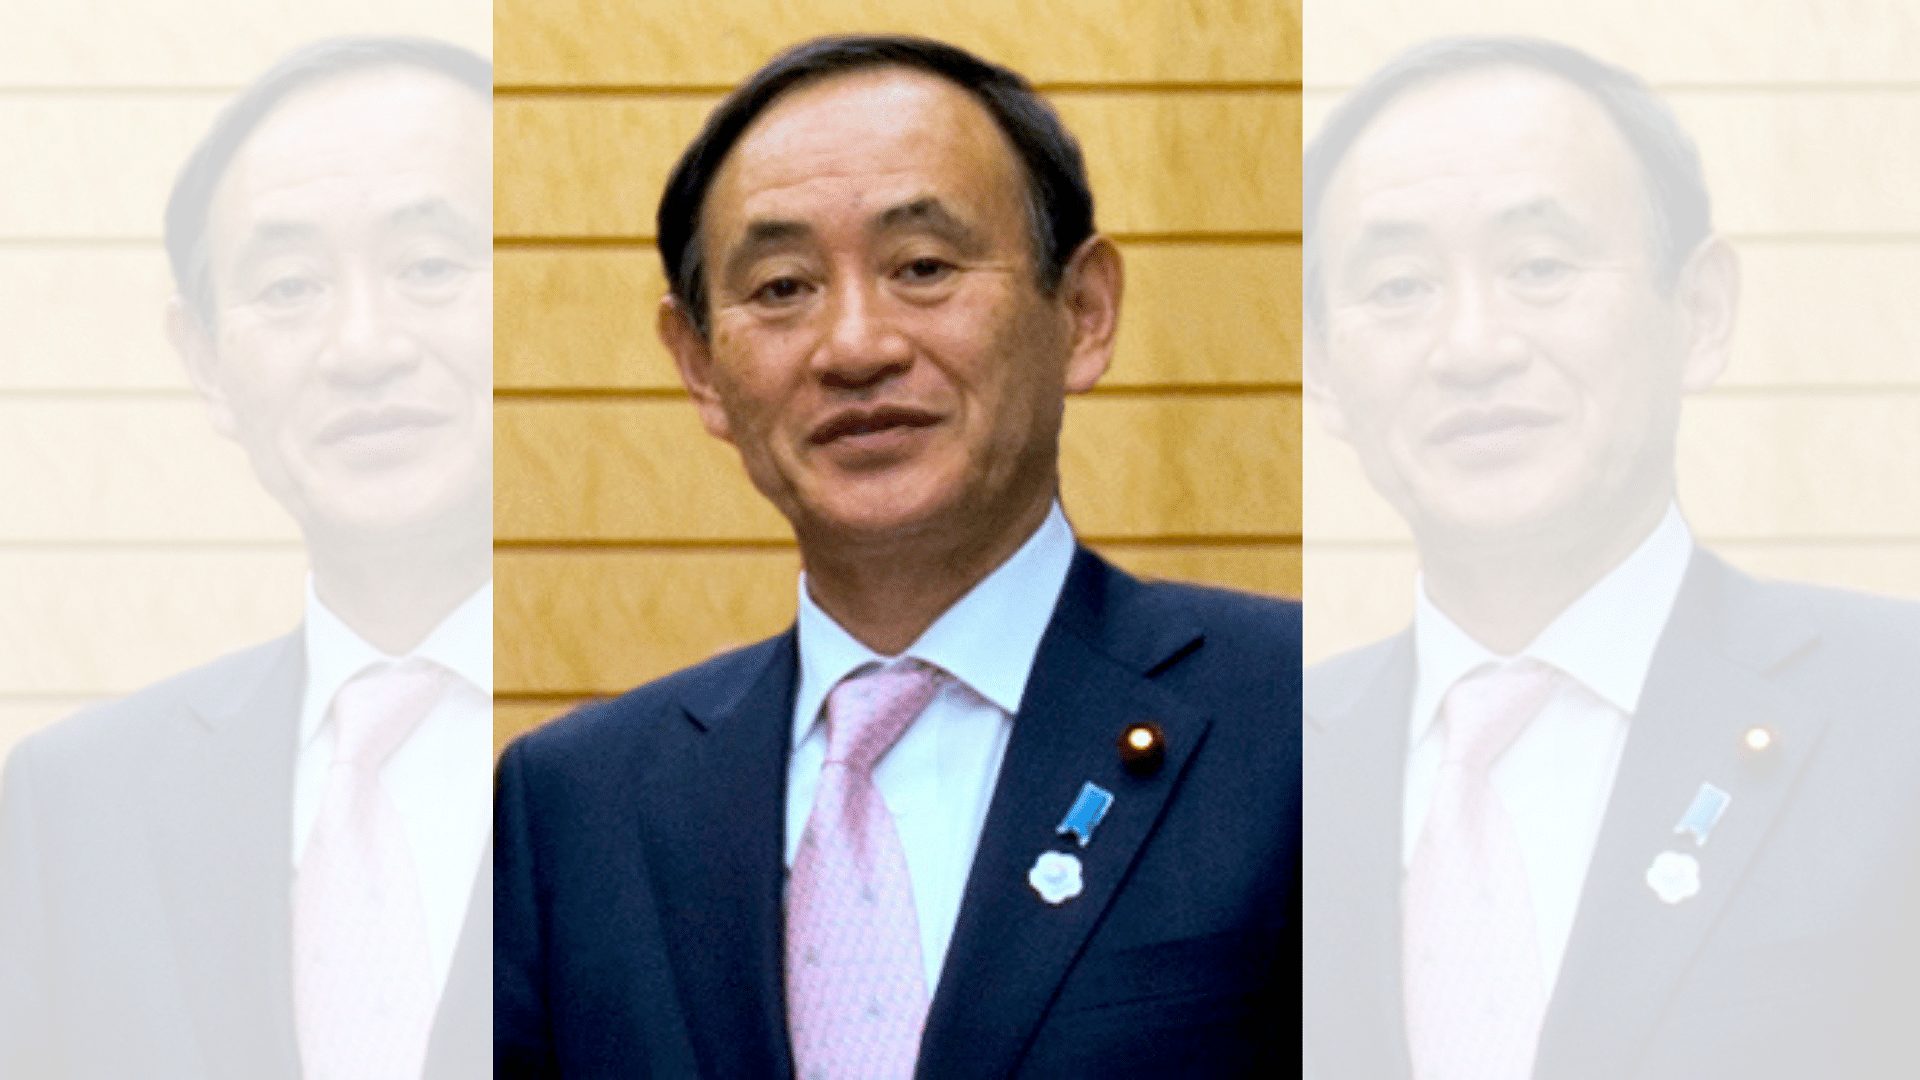 Japan’s Chief Cabinet Secretary Yoshihide Suga was on Monday elected as the new leader of the ruling Liberal Democratic Party.